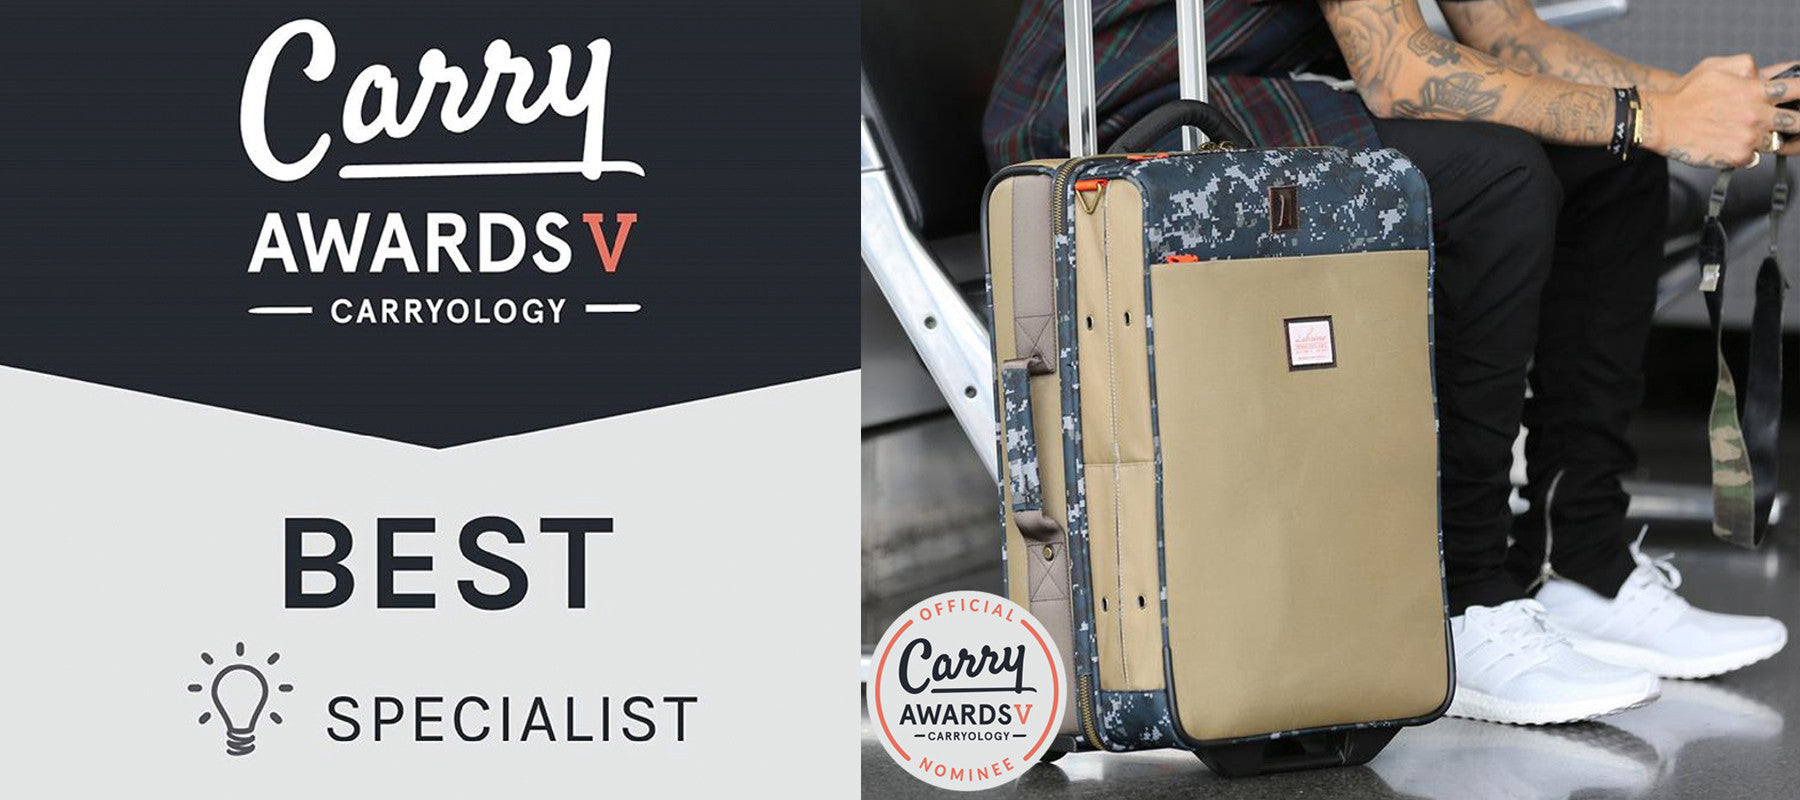 Our Luggage design is nominated for a Carryology Award!